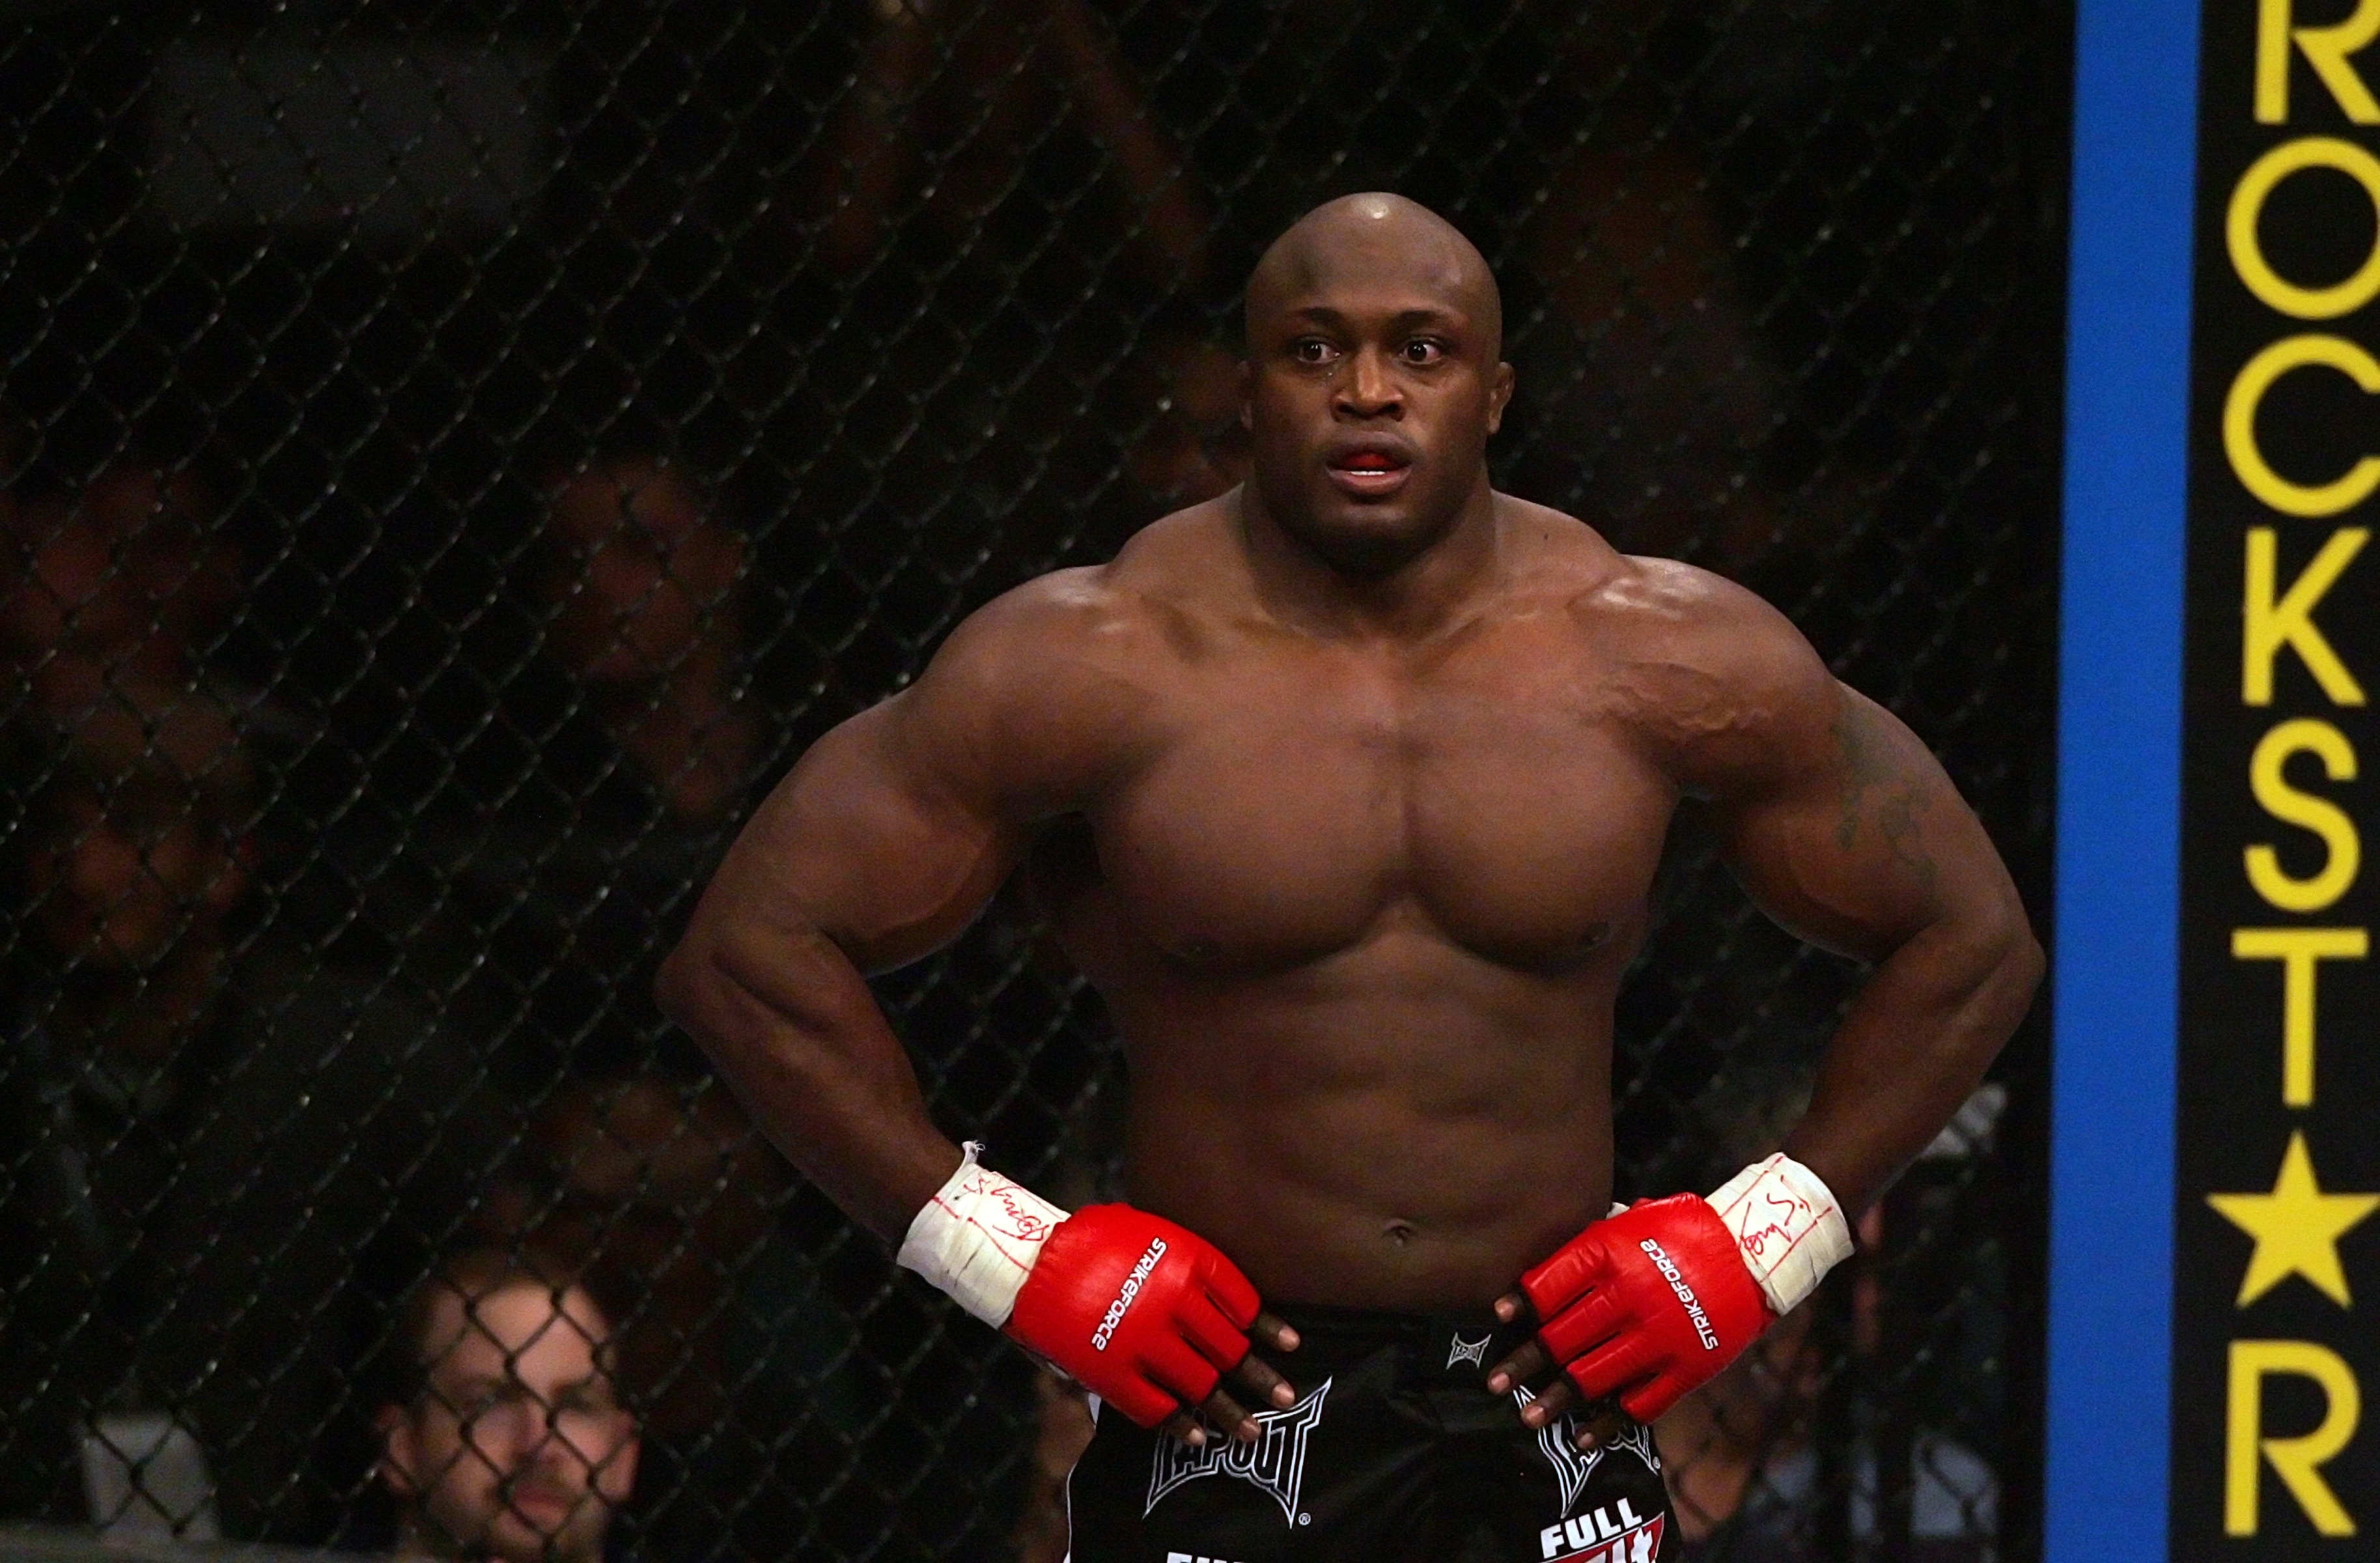 WWE champ Bobby Lashley fought for Bellator, but could not make a UFC deal work